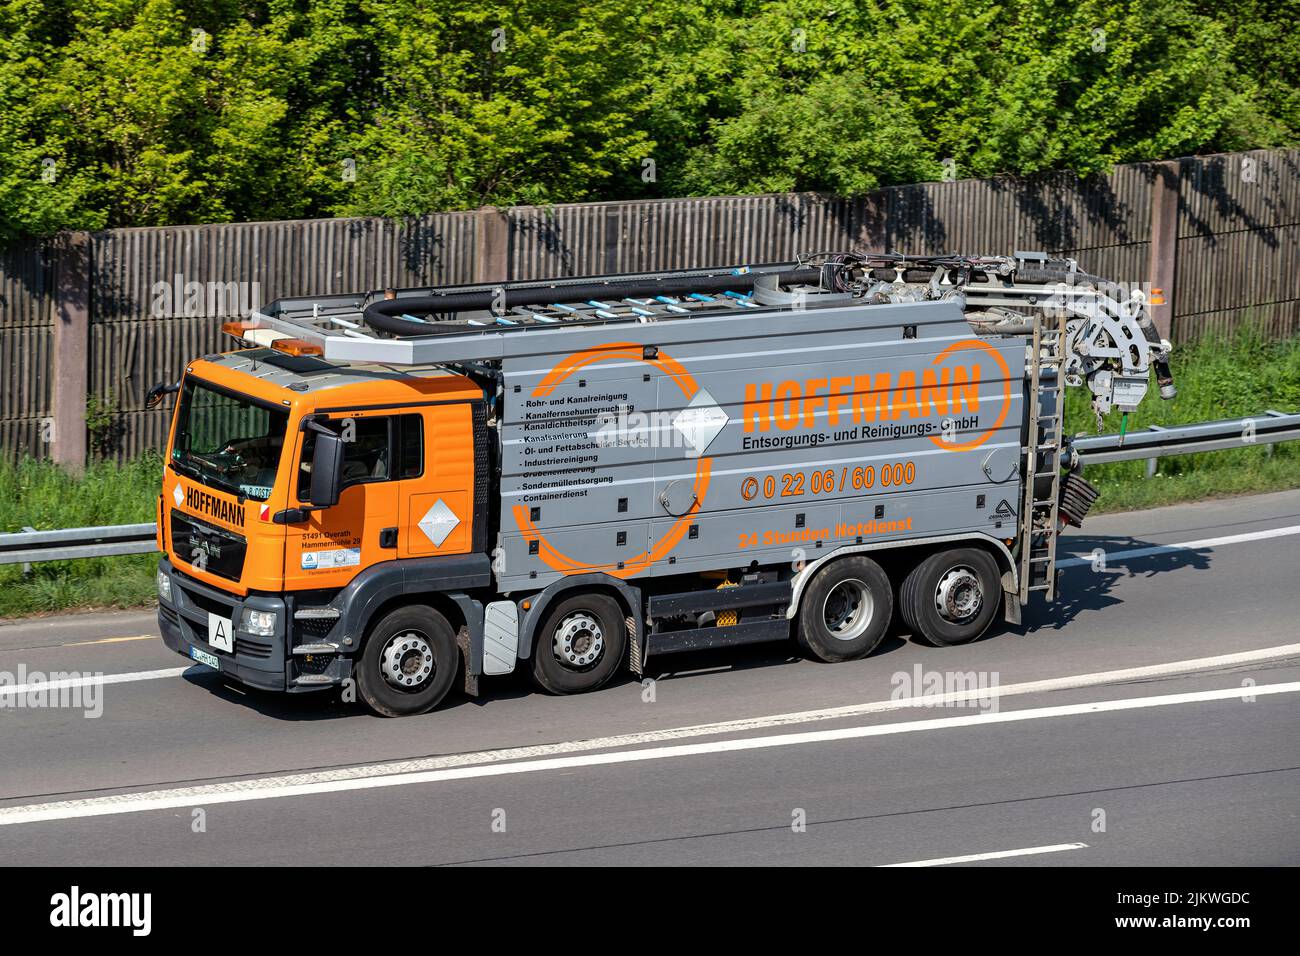 Hoffman MAN sewer cleaning truck on motorway Stock Photo